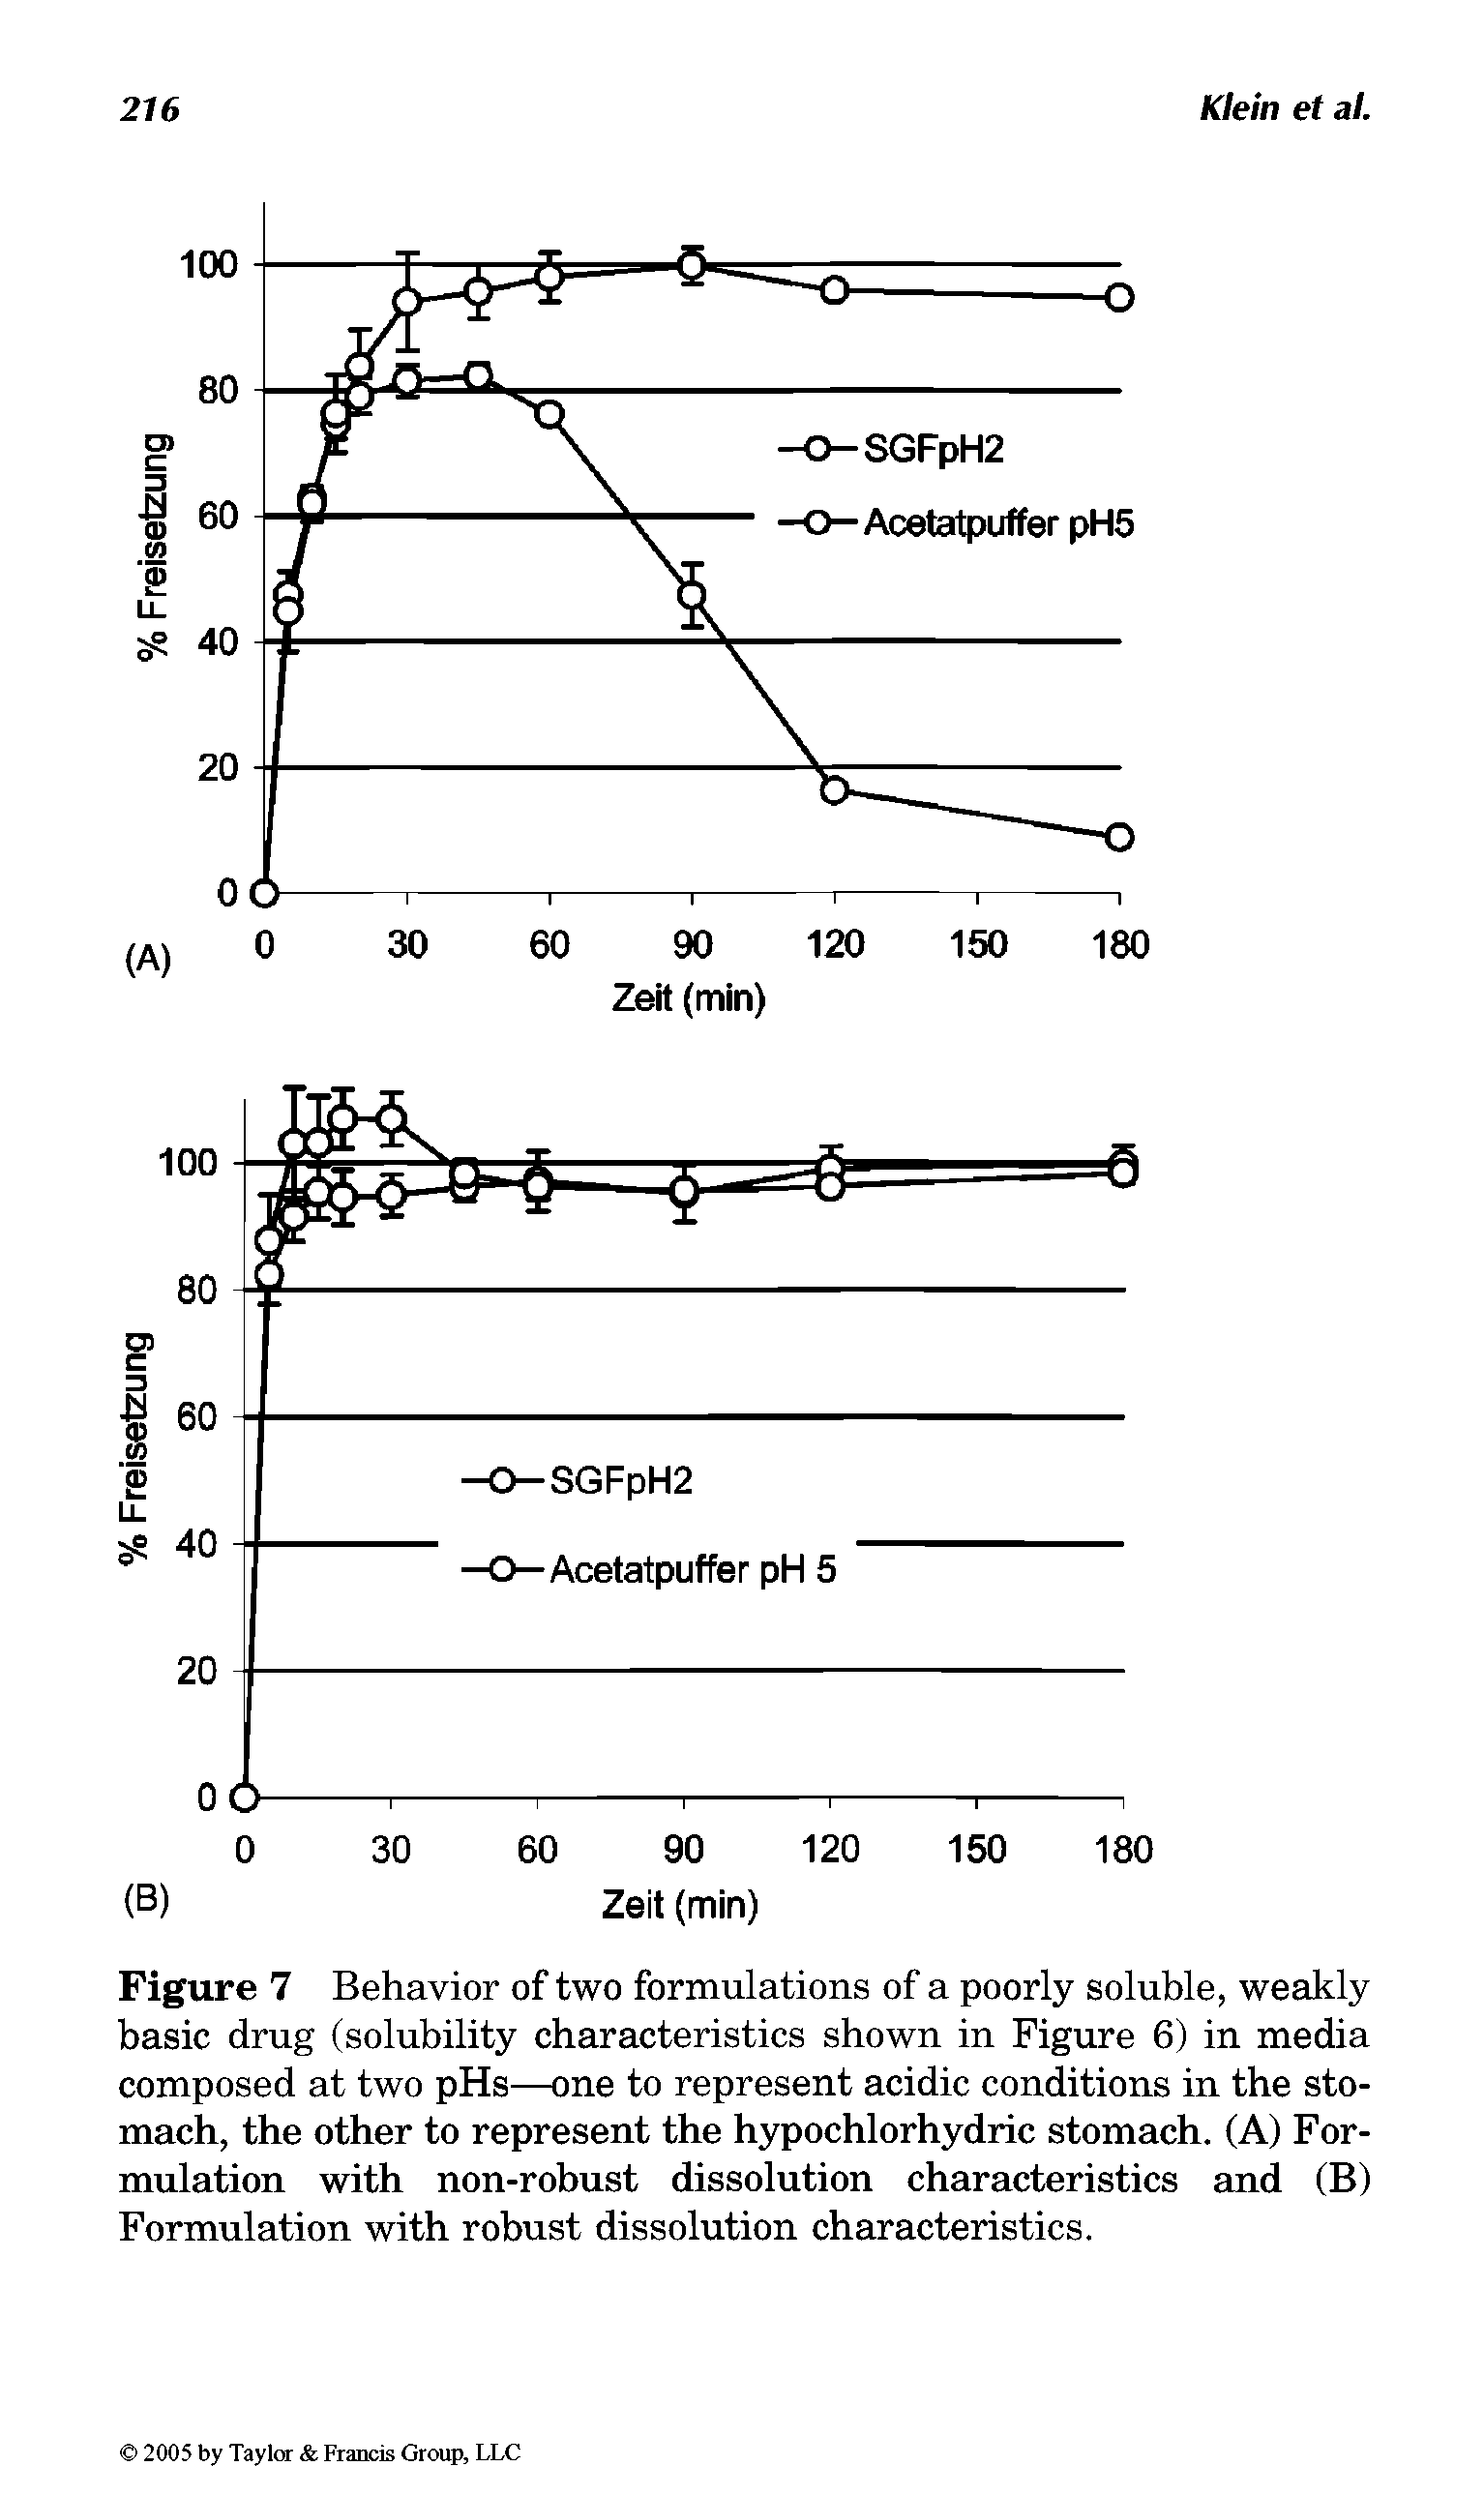 Figure 7 Behavior of two formulations of a poorly soluble, weakly basic drug (solubility characteristics shown in Figure 6) in media composed at two pHs—one to represent acidic conditions in the stomach, the other to represent the hypochlorhydric stomach. (A) Formulation with non-robust dissolution characteristics and (B) Formulation with robust dissolution characteristics.